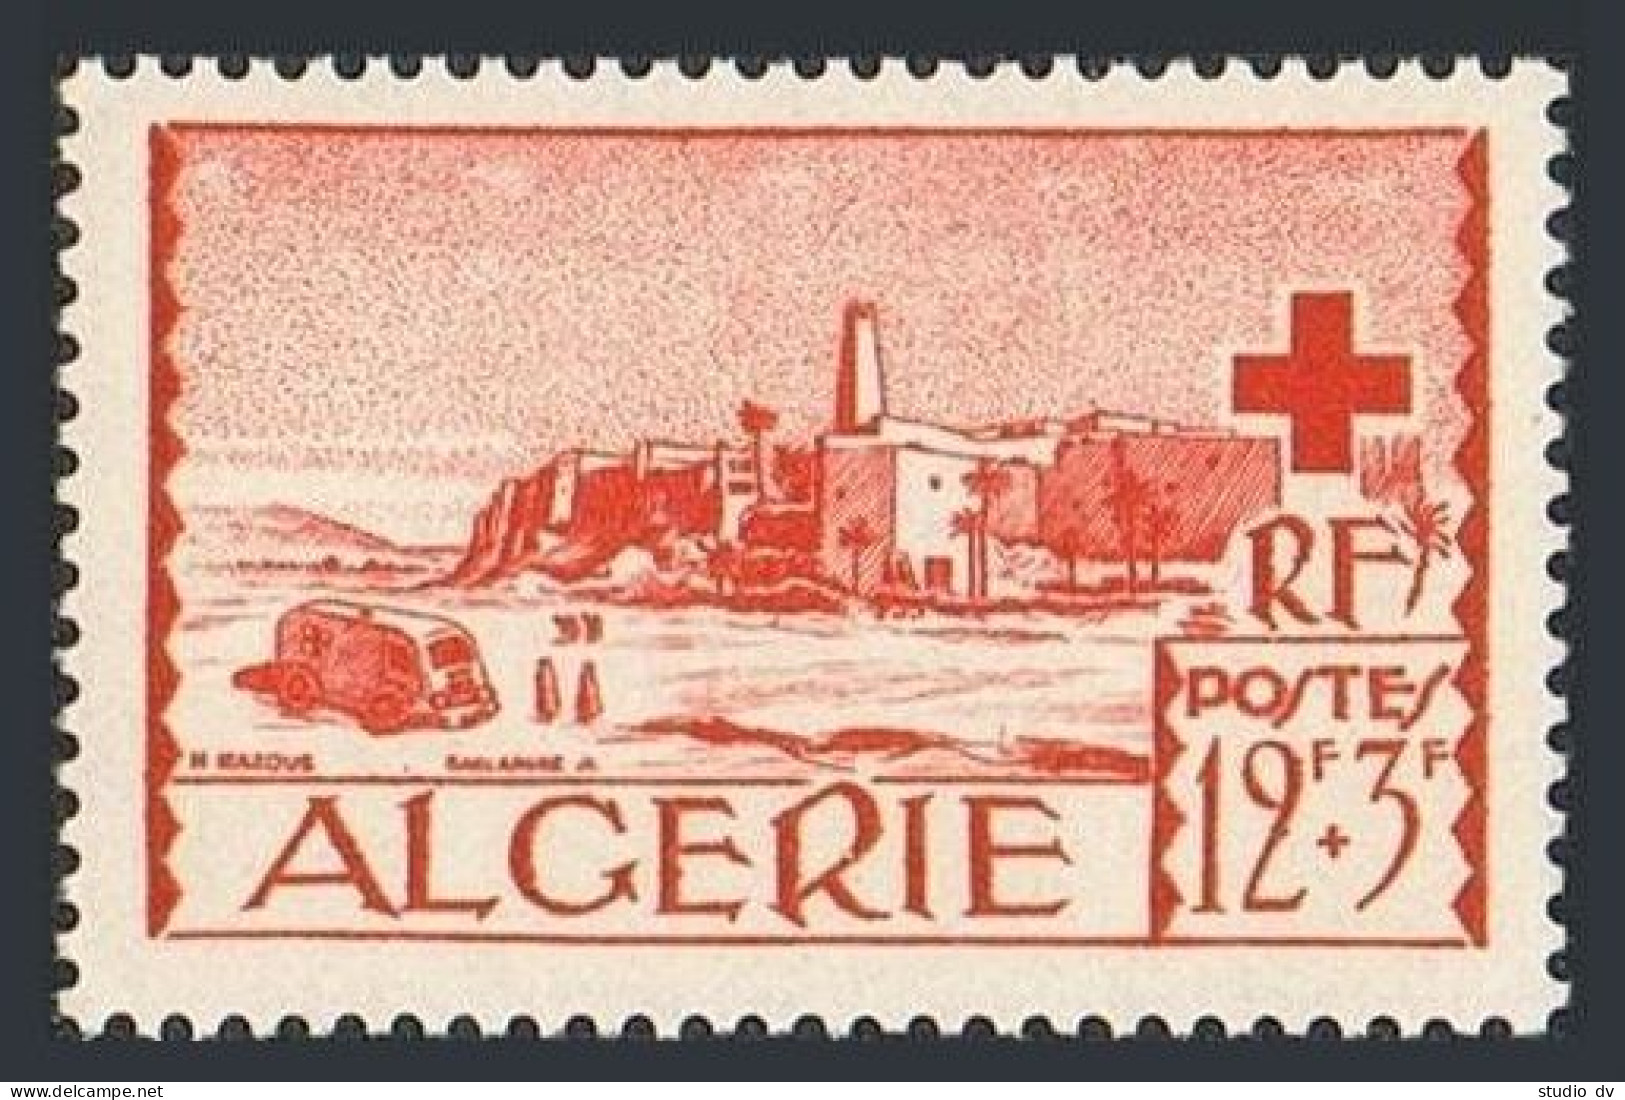 Algeria B68,MNH.Michel 311. Red Cross 1952.View Of El Oued.Map,truck. - Algérie (1962-...)